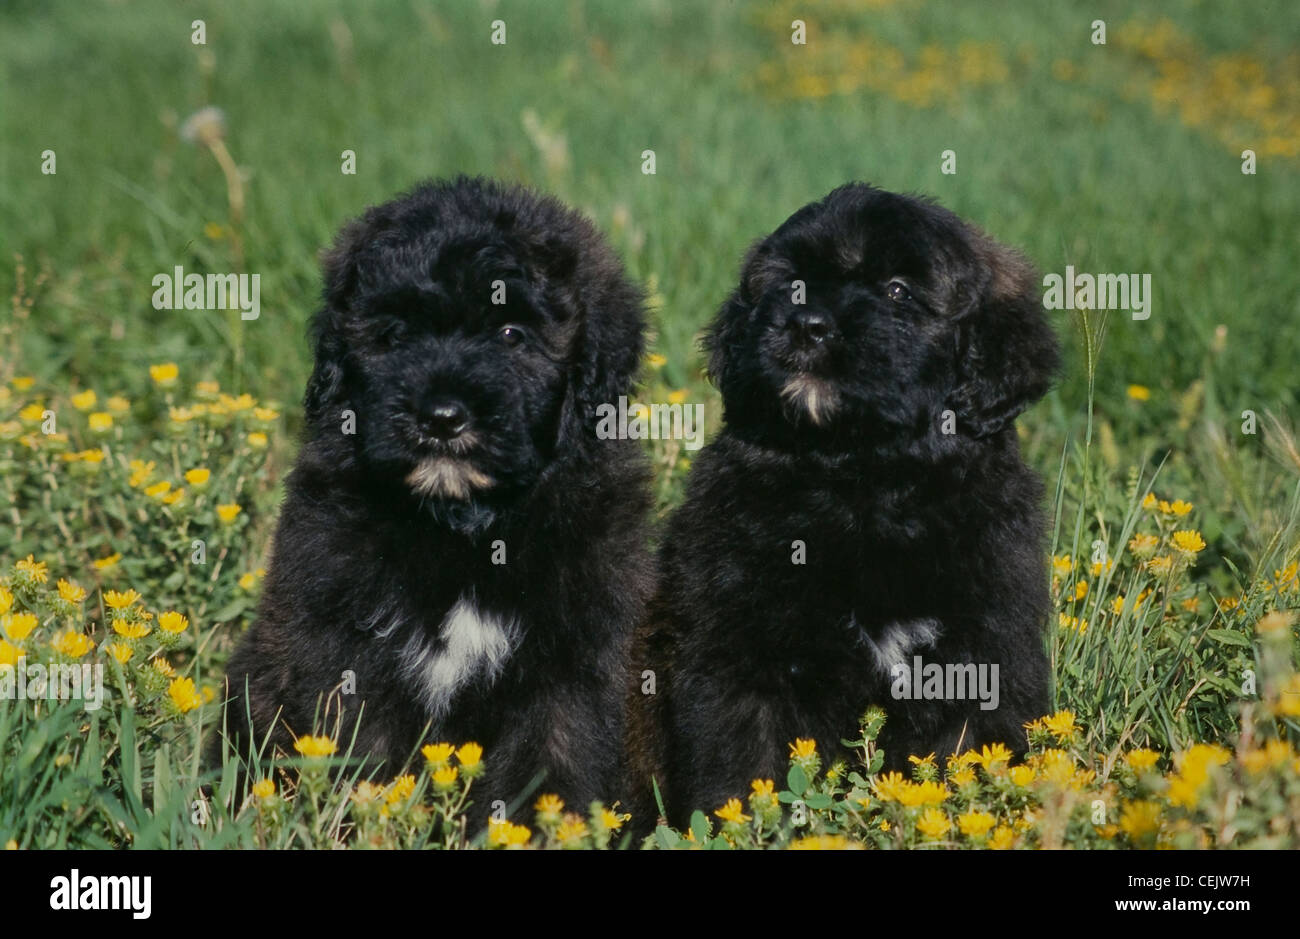 Two Bouvier des Flandres puppies sitting together Stock Photo